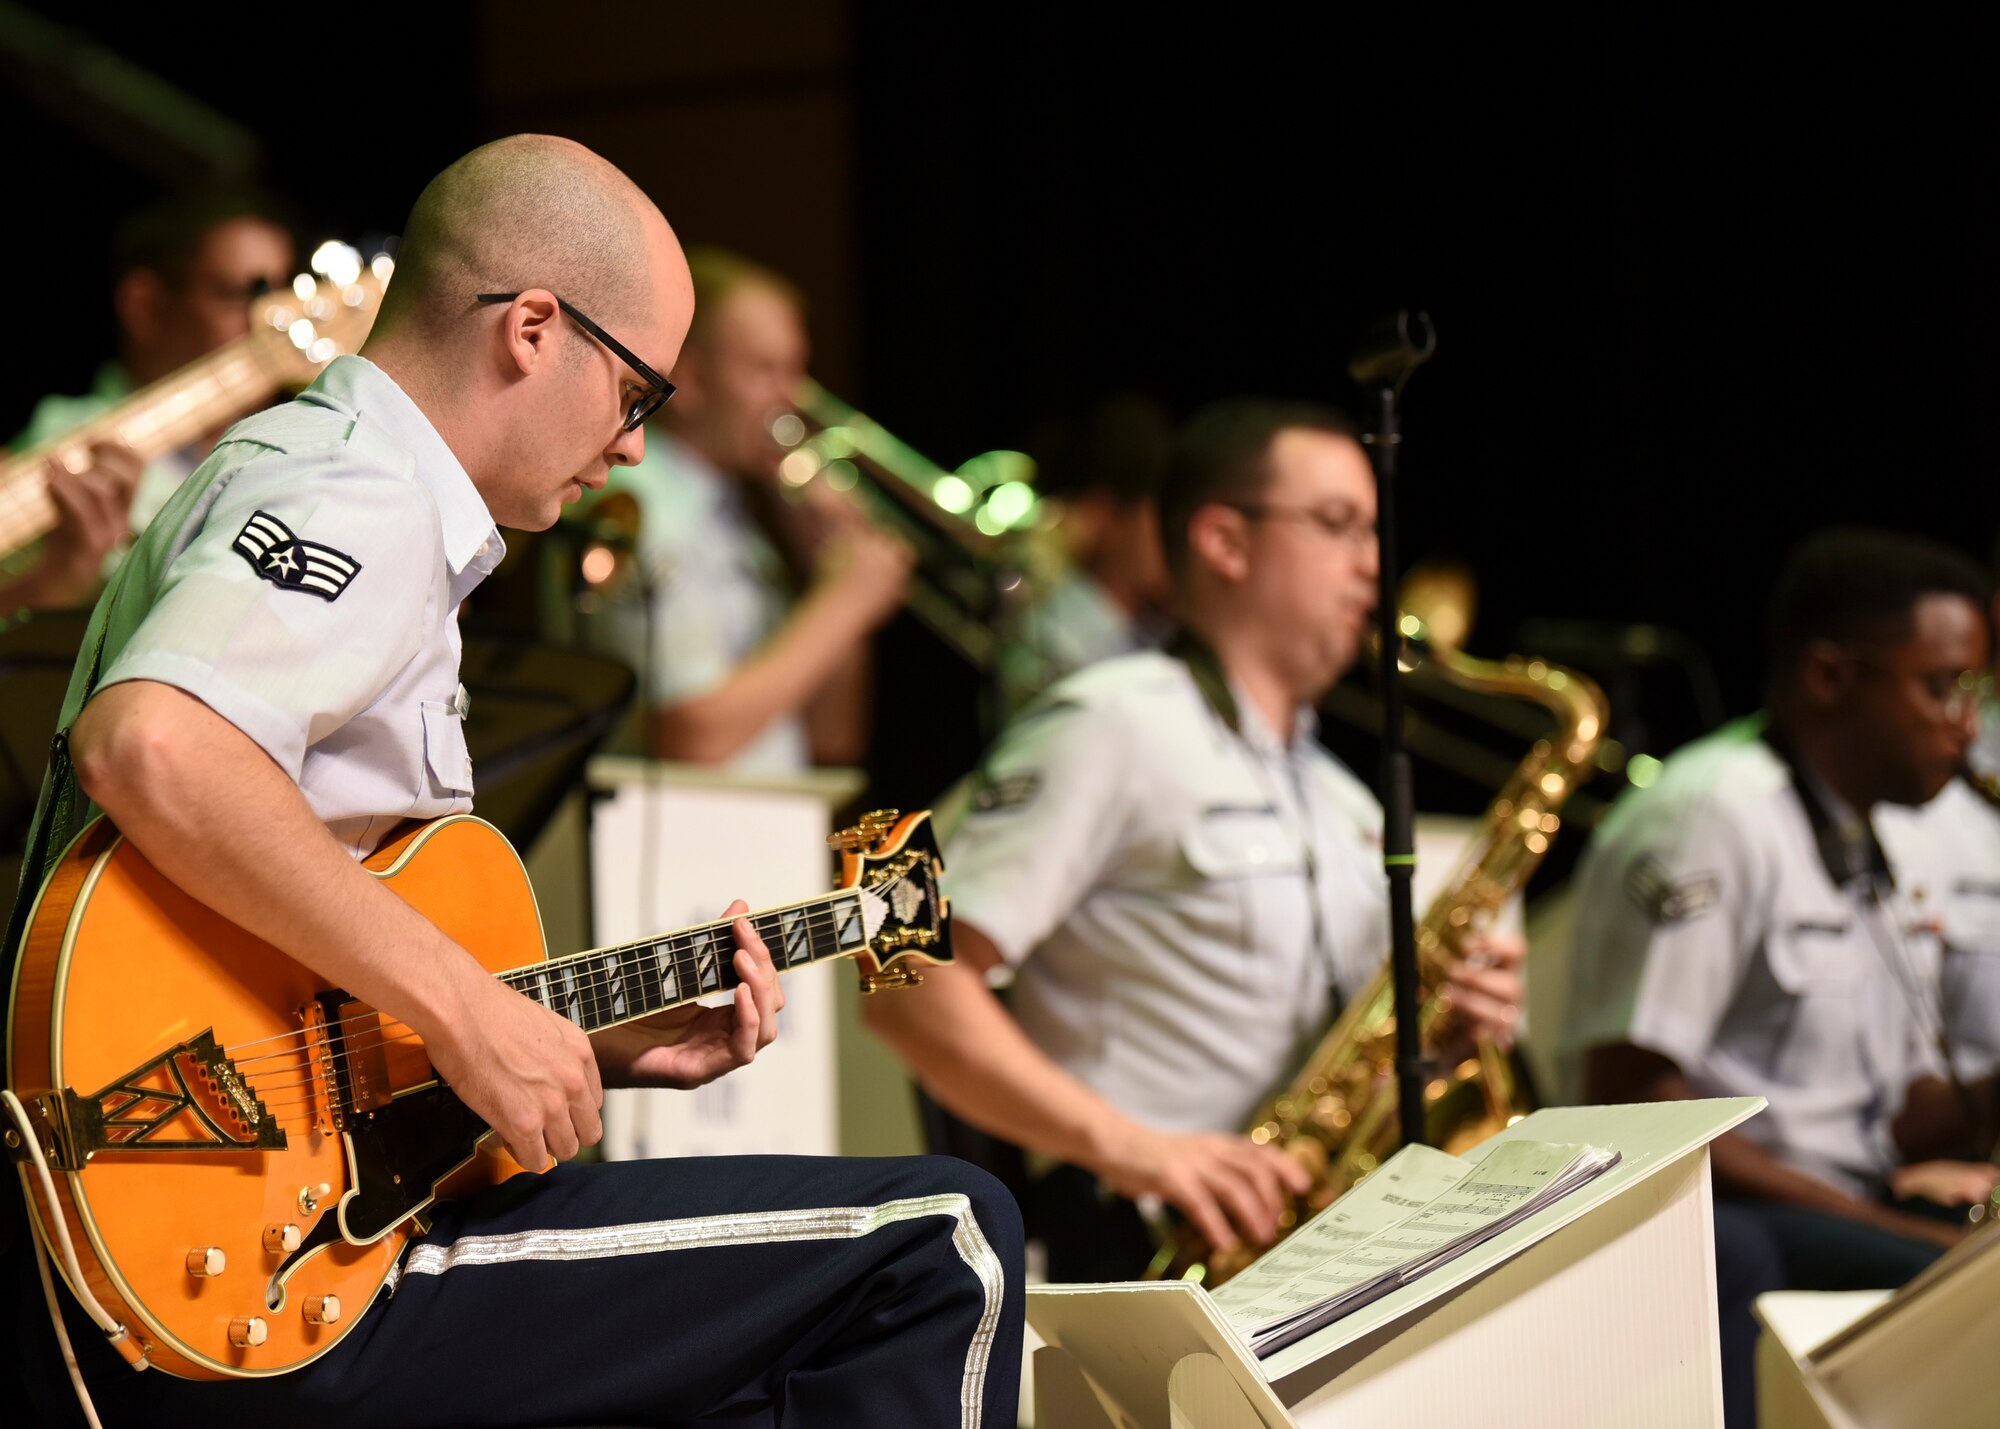 U.S. Air Force Senior Airman Pete Somerville, U.S. Air Force Band of the Pacific guitarist, plays for the Gunsan City’s Chamber of Commerce at the Dongwoo Concert Hall in Gunsan City, Republic of Korea, Sept. 26, 2019. The band performed in India, Mongolia and Thailand earlier this year and will play shows in Japan and Guam later this year. (U.S. Air Force photo by Staff Sgt. Anthony Hetlage)